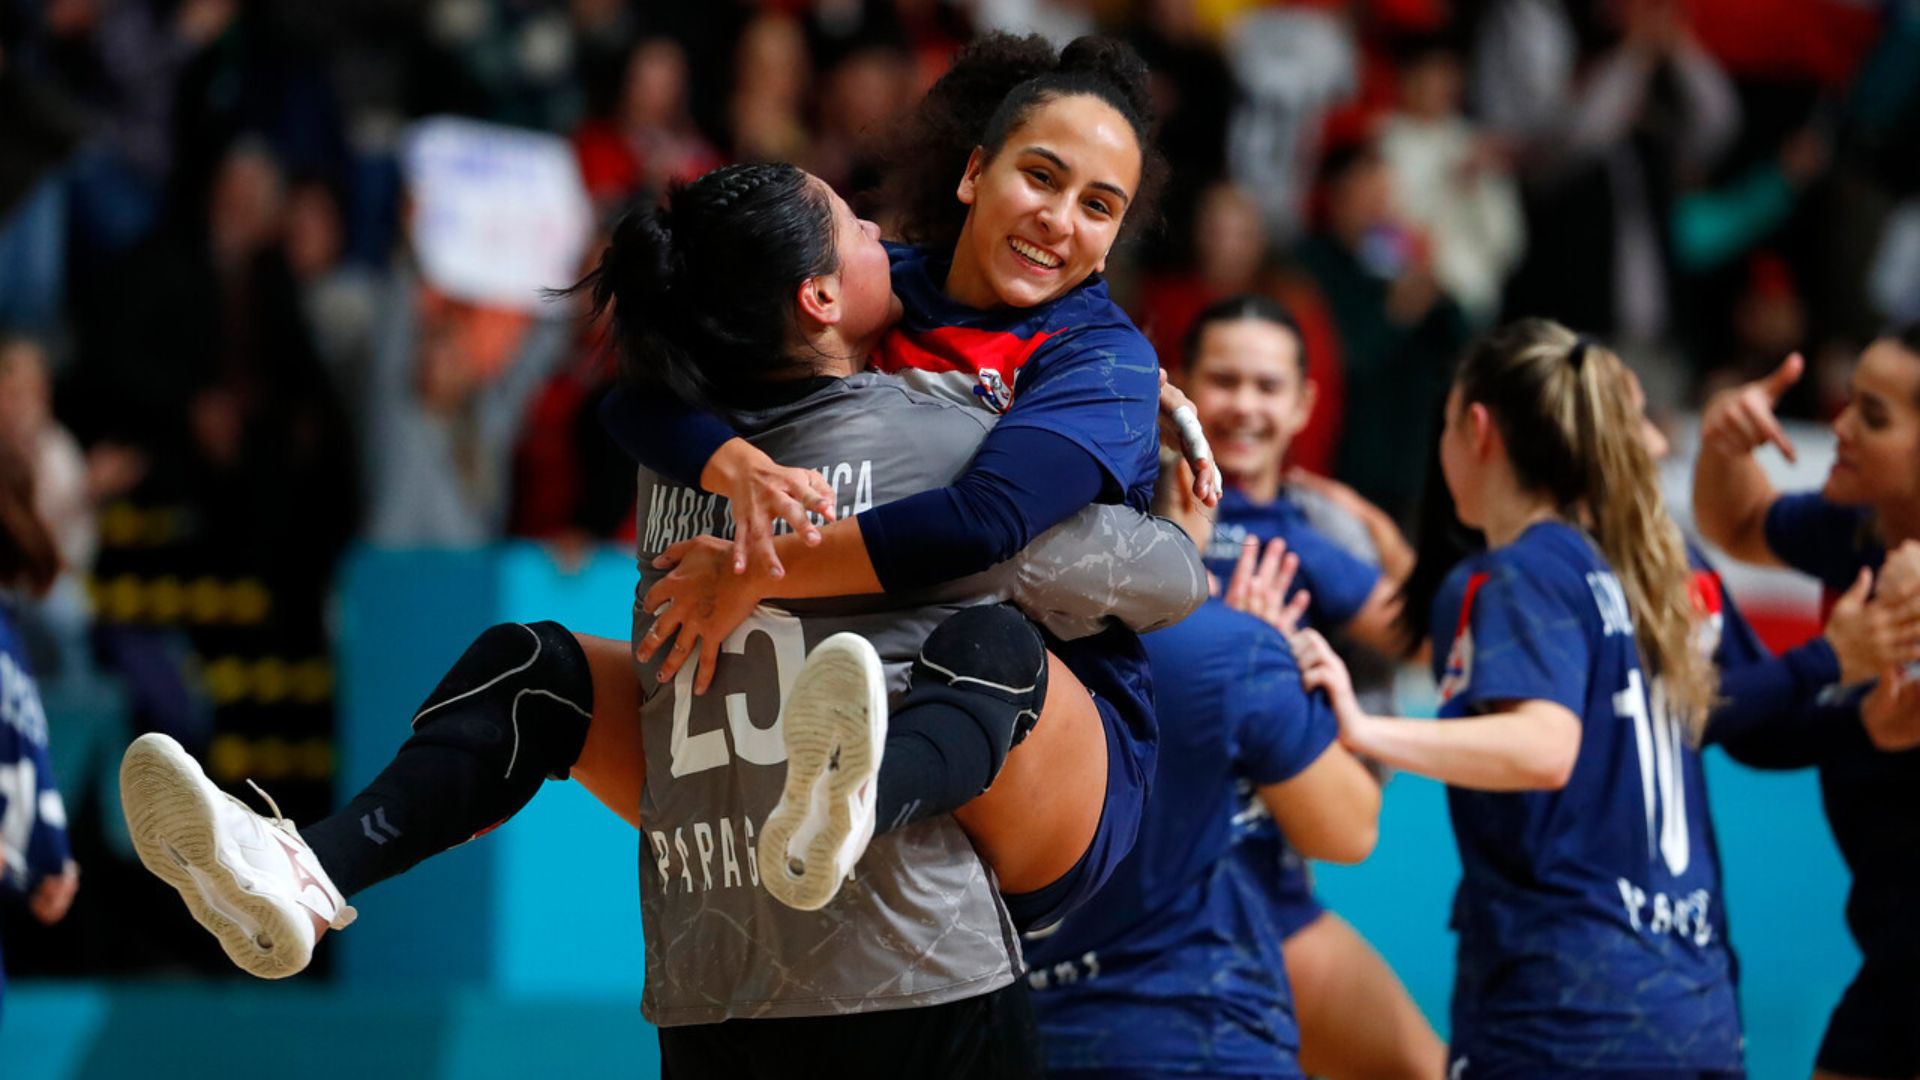 Handball: Paraguay claimed the Pan American bronze in the female's division